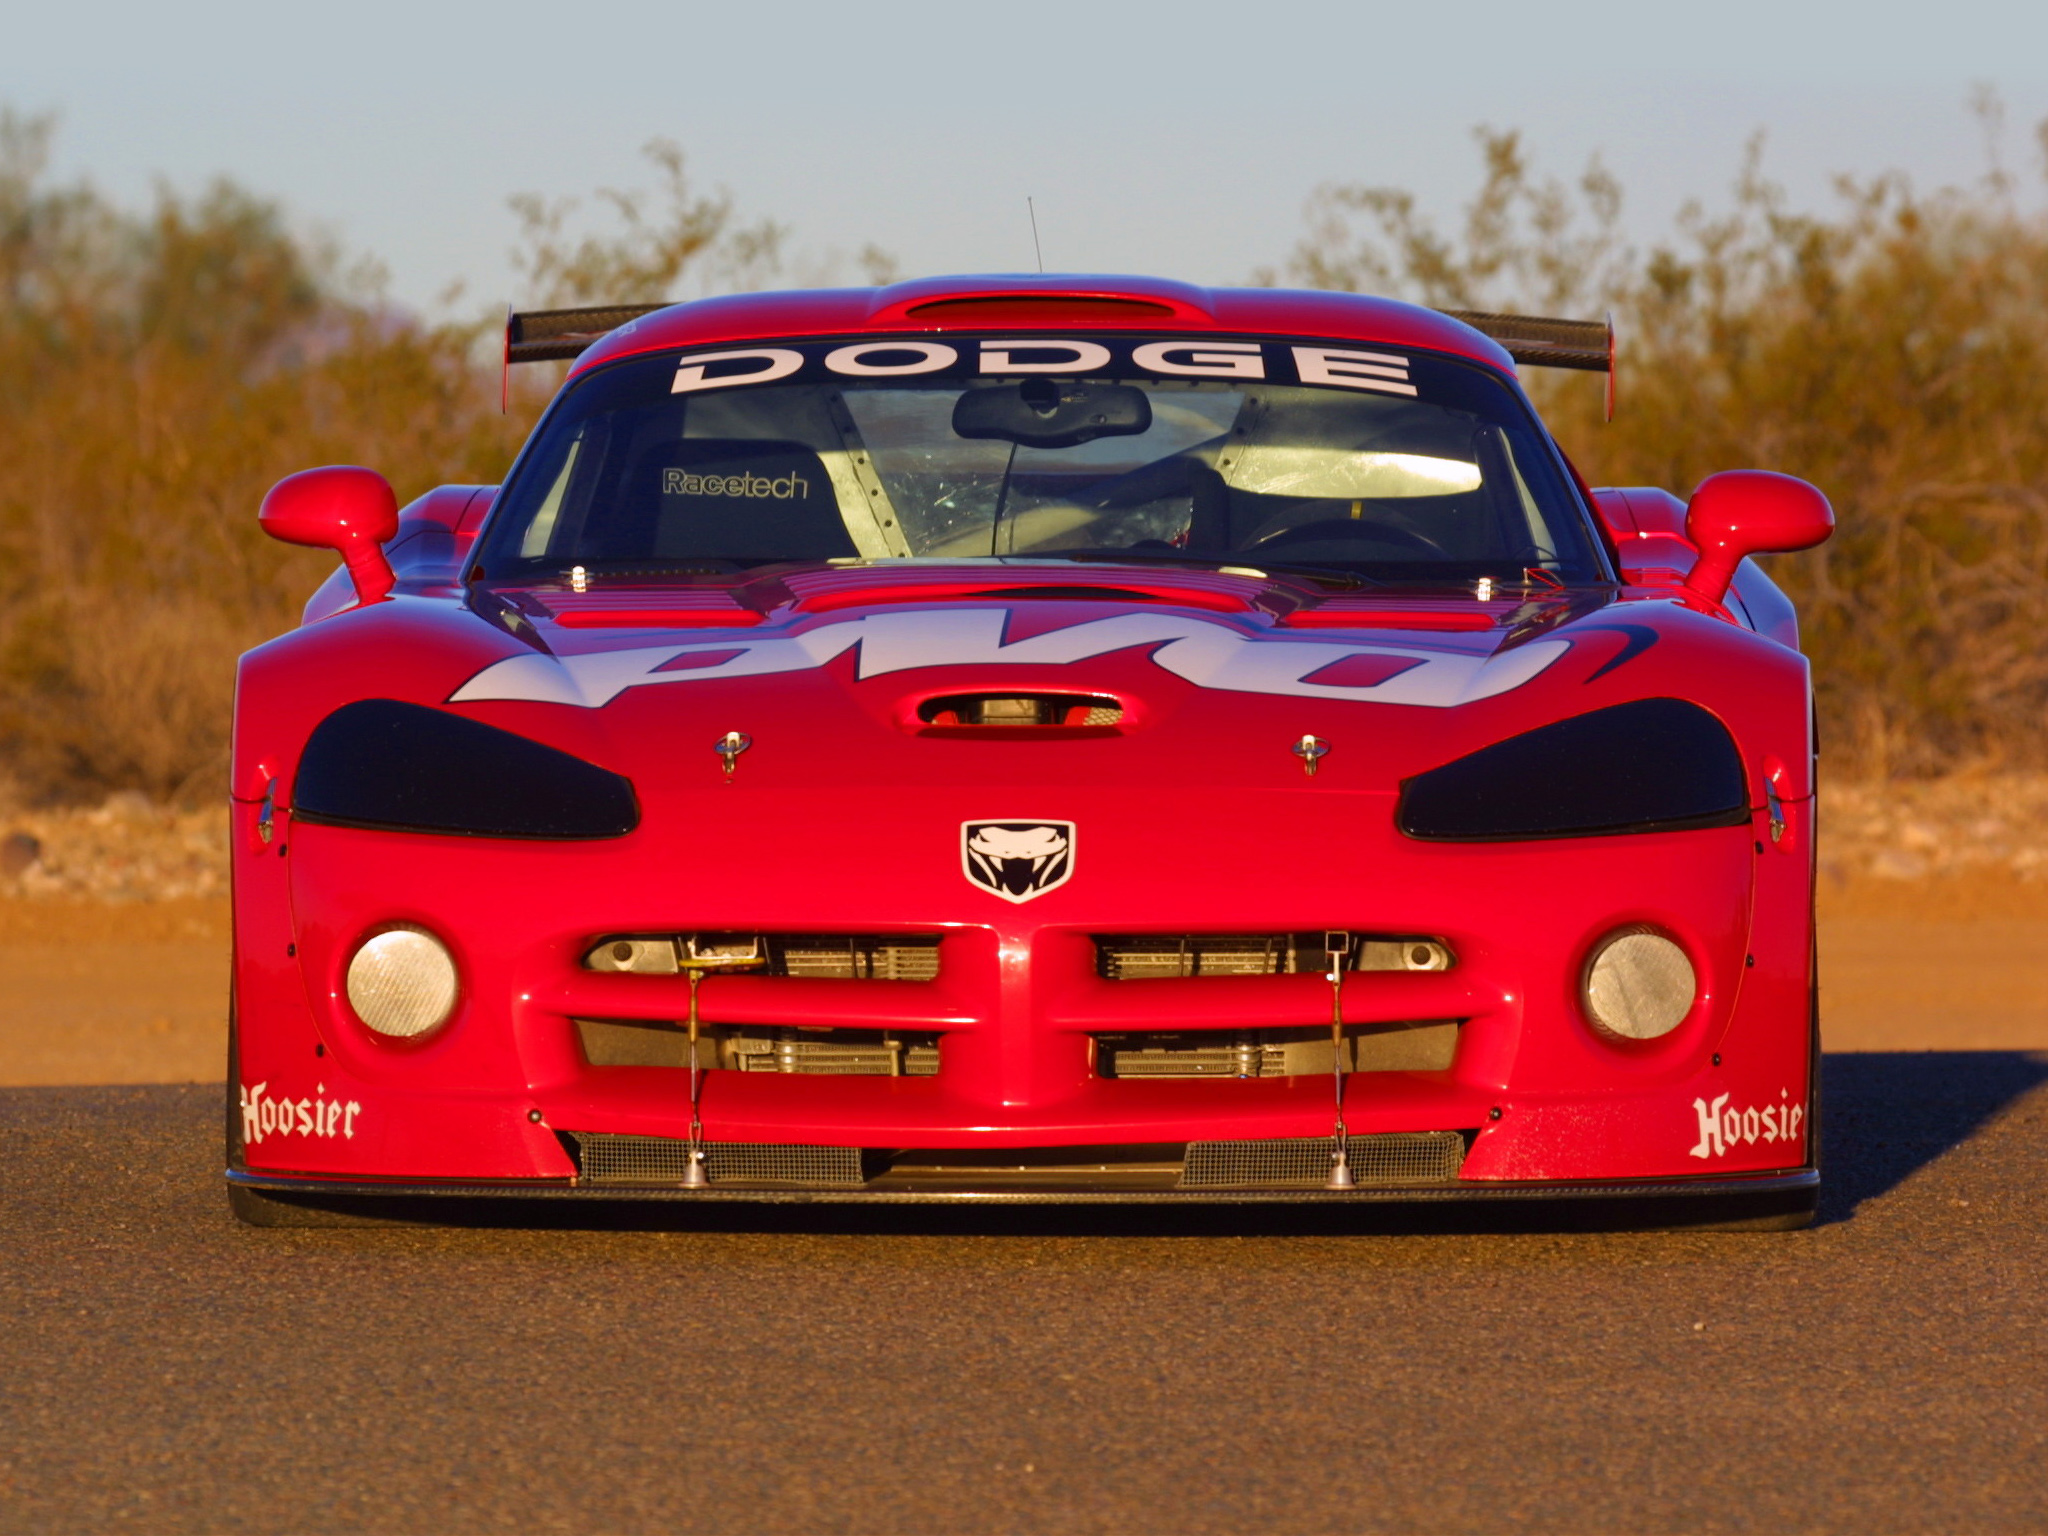 20, 02dodge, Viper, Srt10, Competition, Coupe, Race, Racing, Supercar, Supercars, Gd Wallpaper